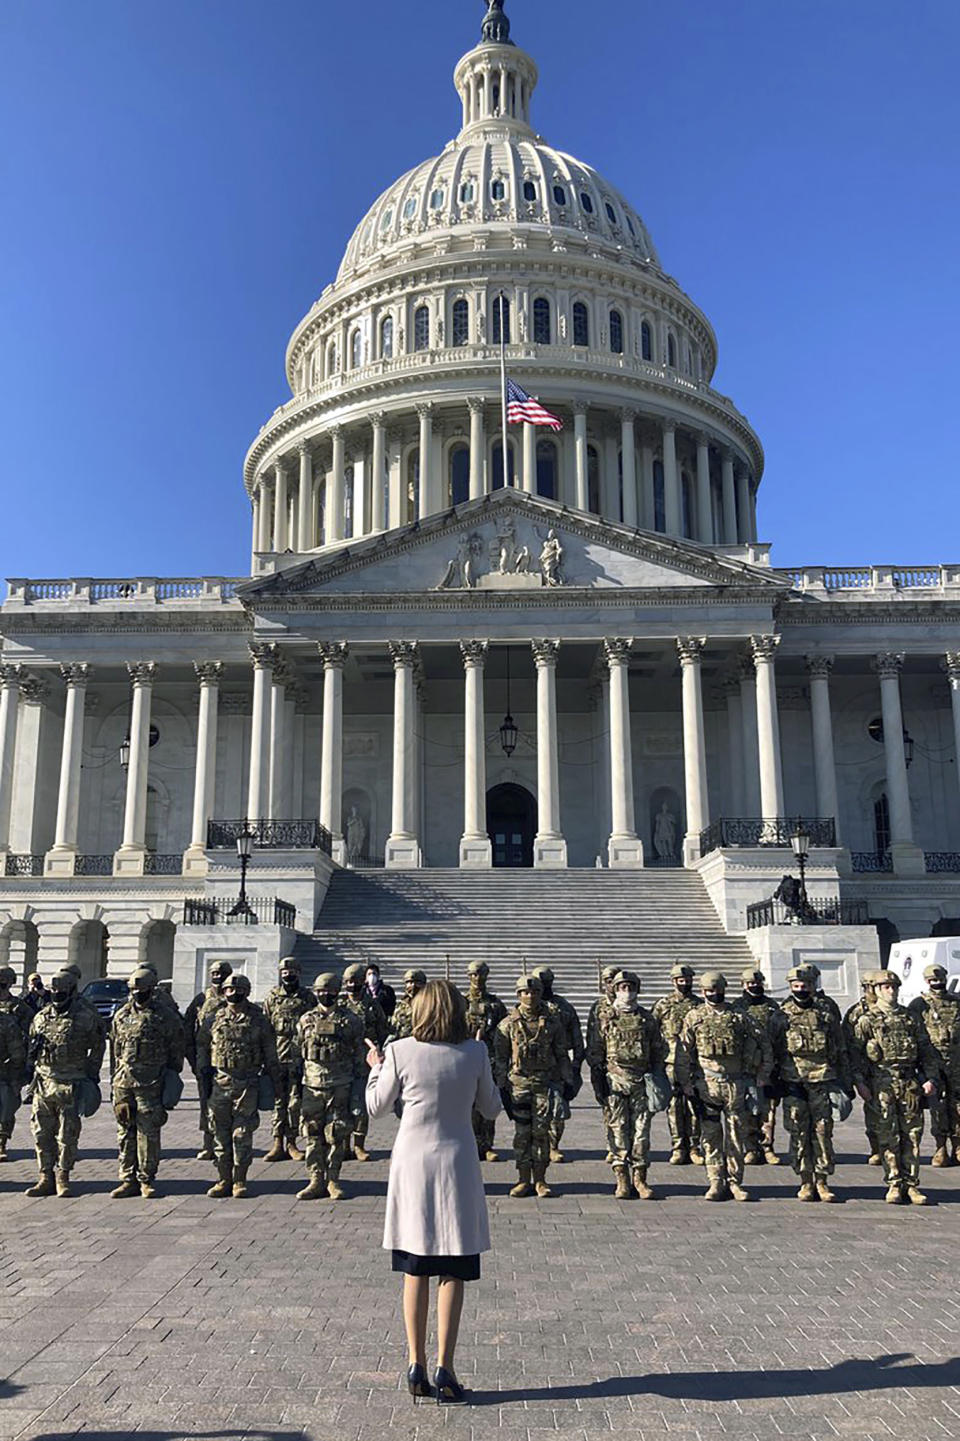 This image released by the Speaker of the House Nancy Pelosi's Office, Pelosi speaks to National Guard troops outside the U.S. Capitol on Wednesday, Jan. 13, 2021, in Washington. (Drew Hammill/Speaker of the House Nancy Pelosi's Office via AP)